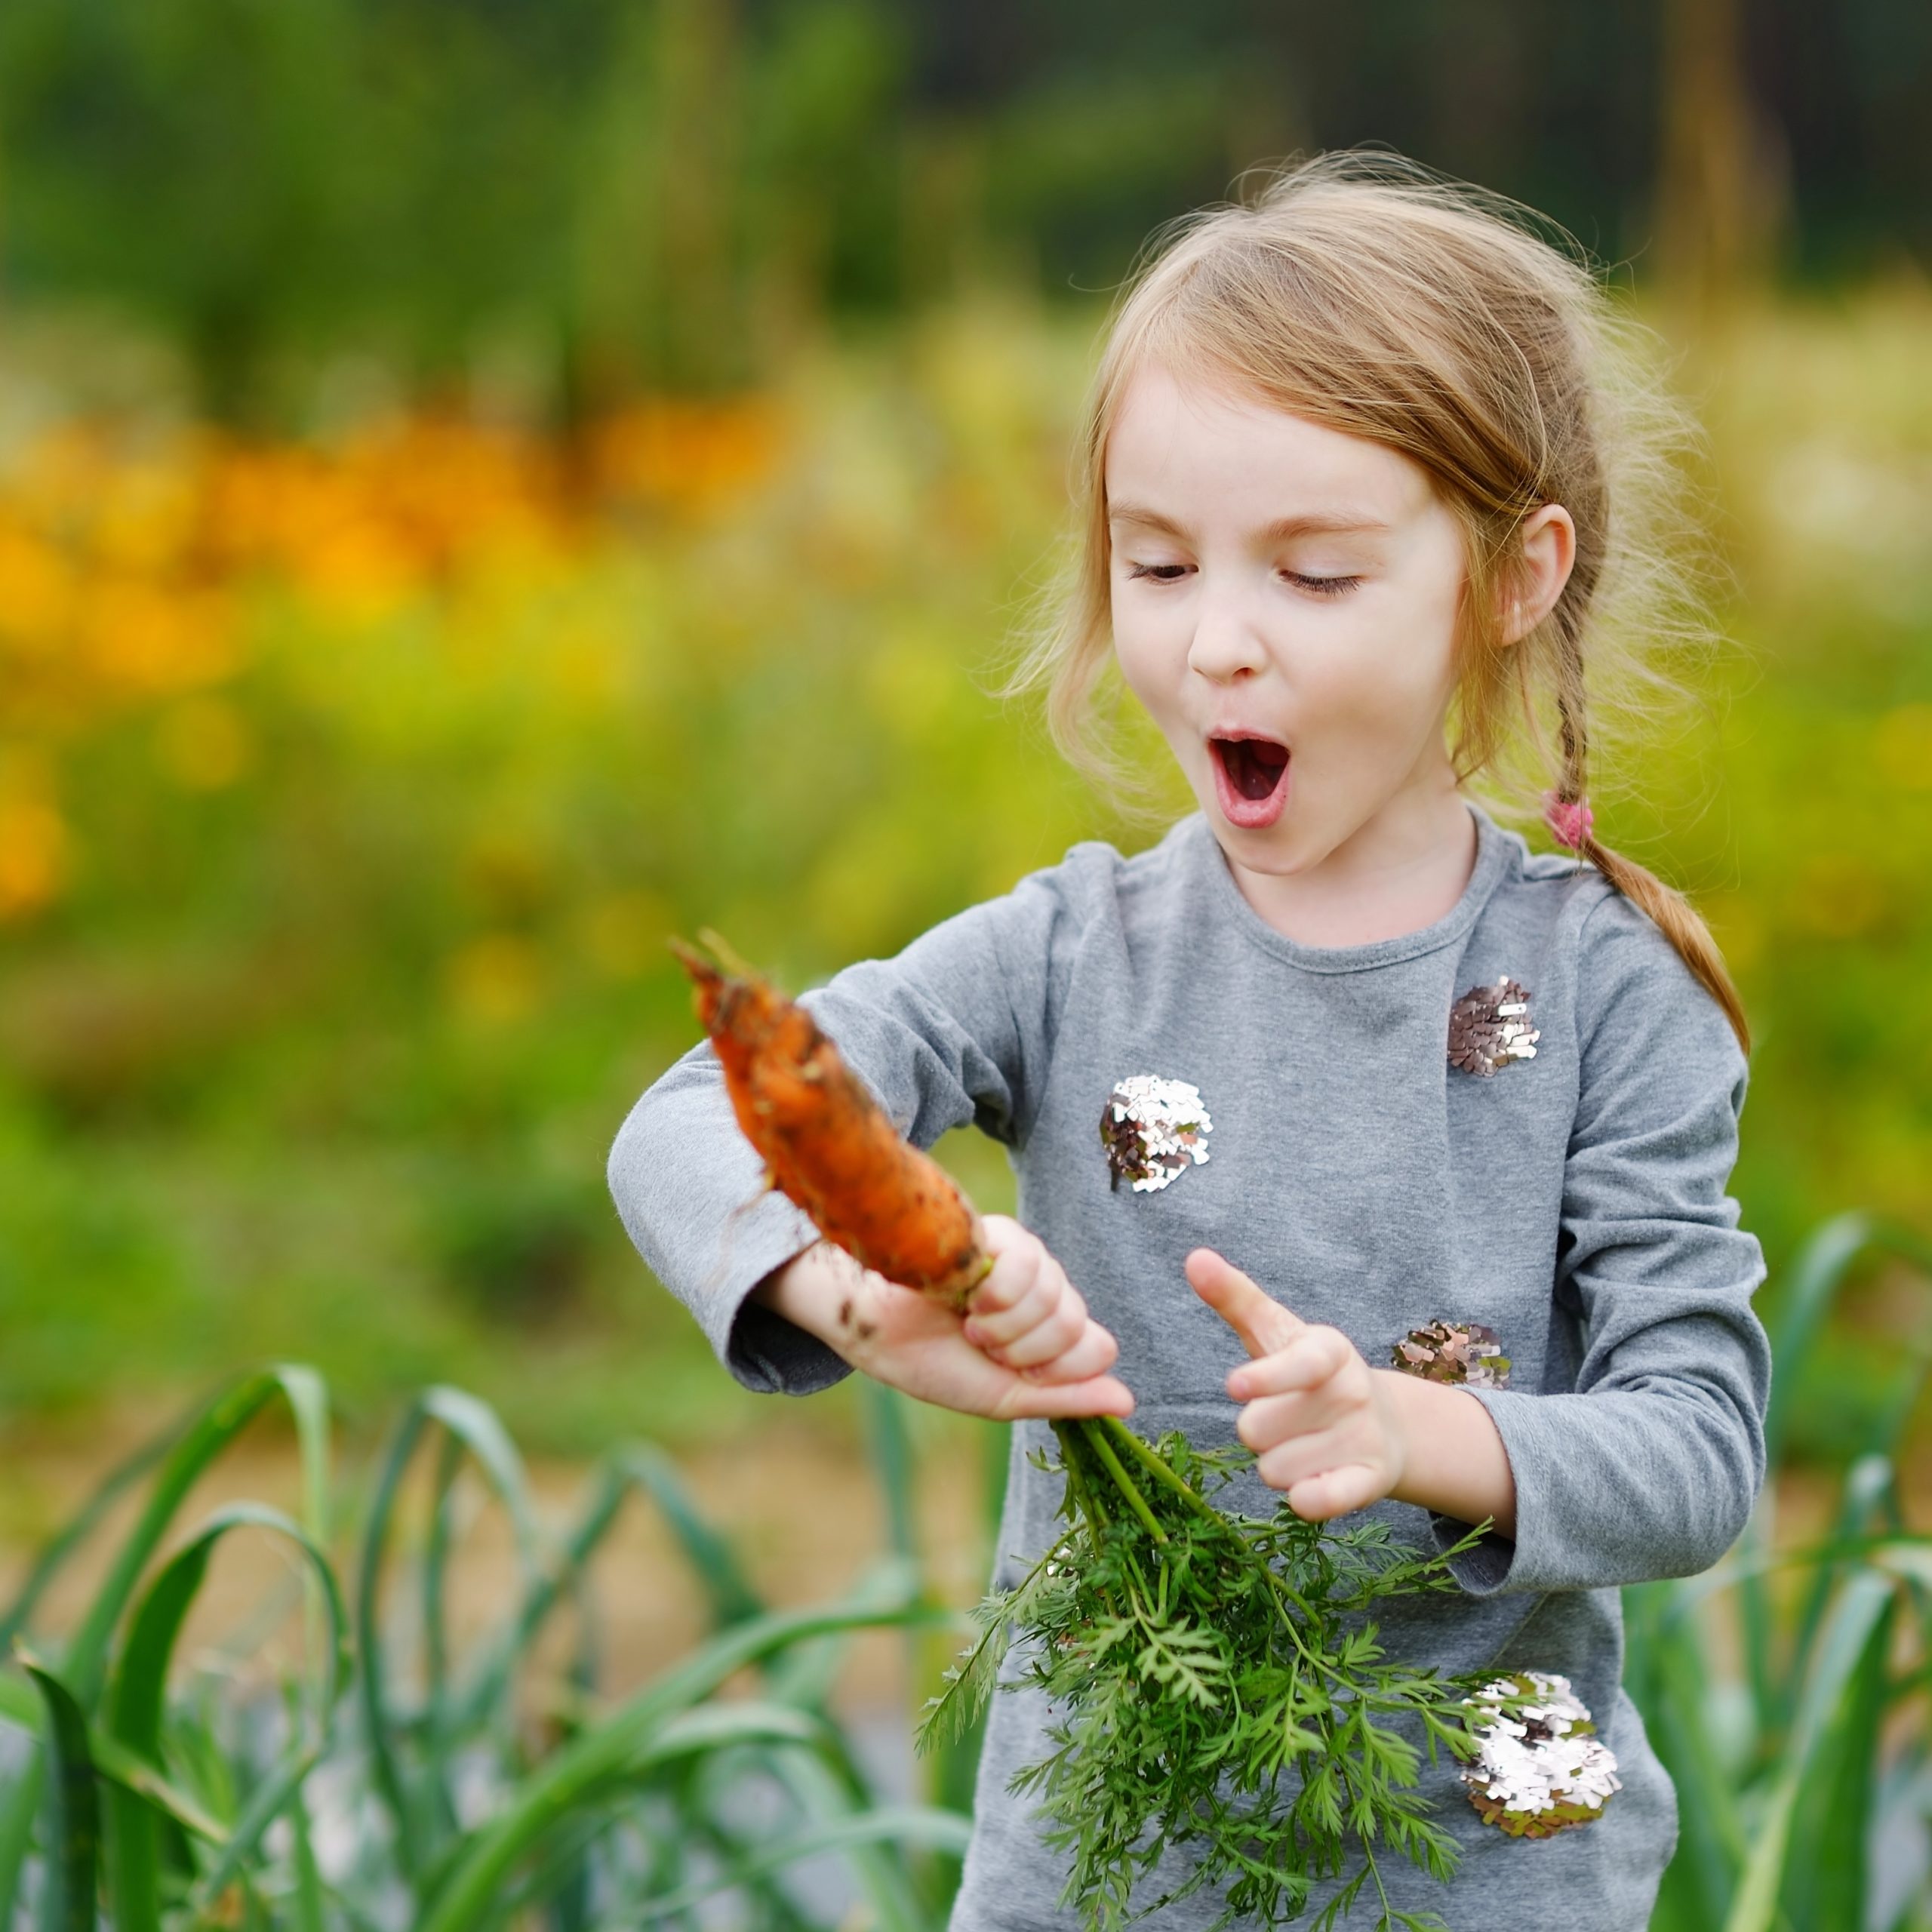 Girl excited to pick carrot from ground